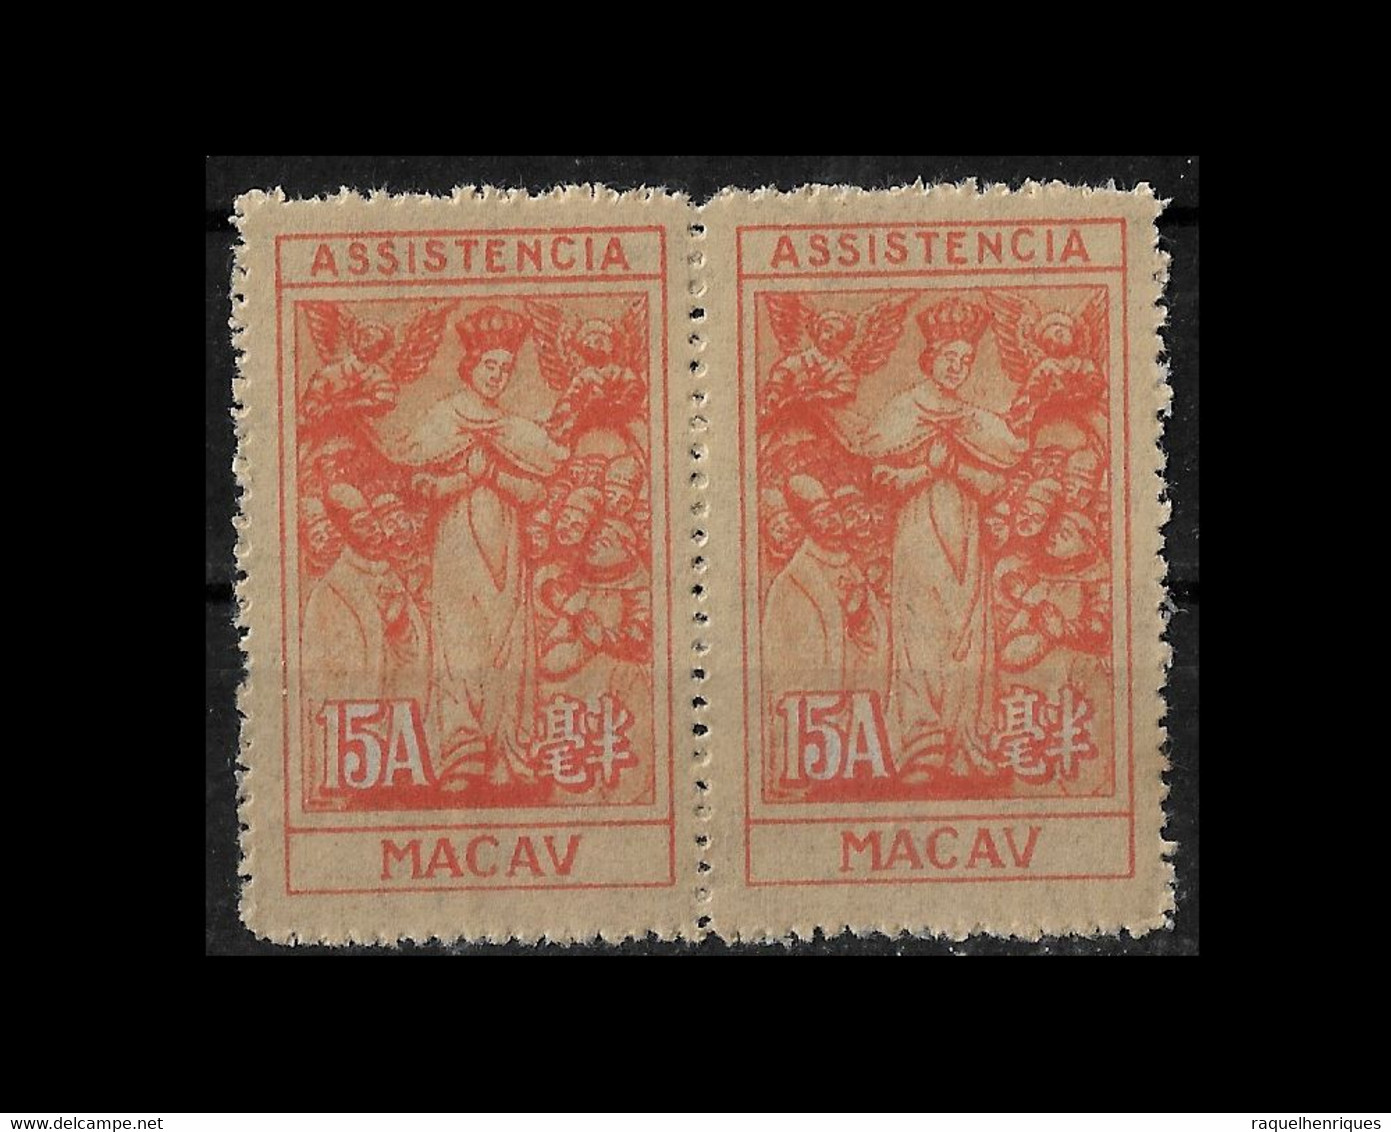 MACAU STAMP - 1945-47 Symbol Of Charity - Inscription "ASSISTENCIA" Perf:11 PAIR MNH (BA5#319) - Postage Due